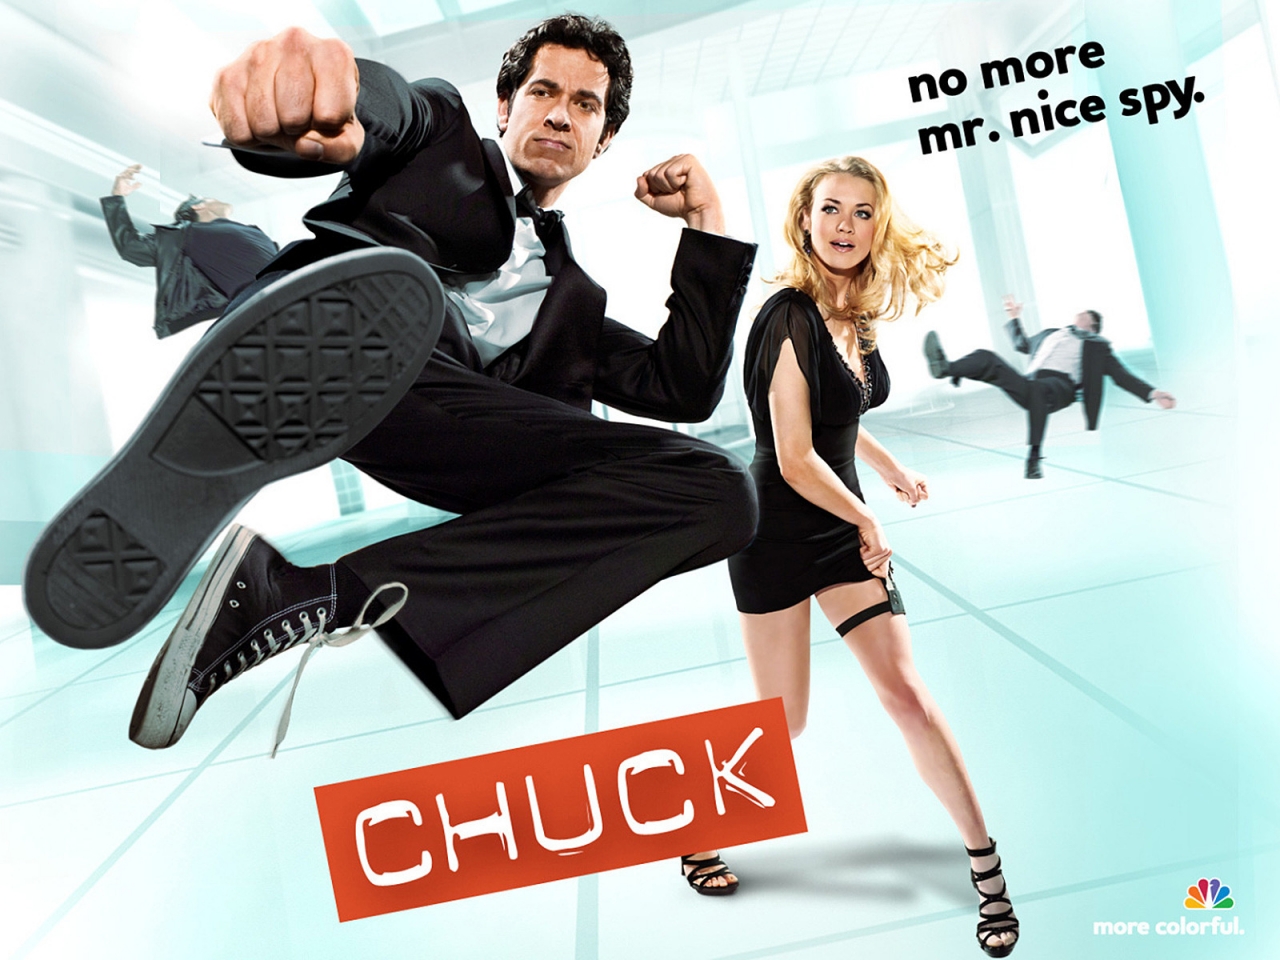 Kung Fu Chuck for 1280 x 960 resolution